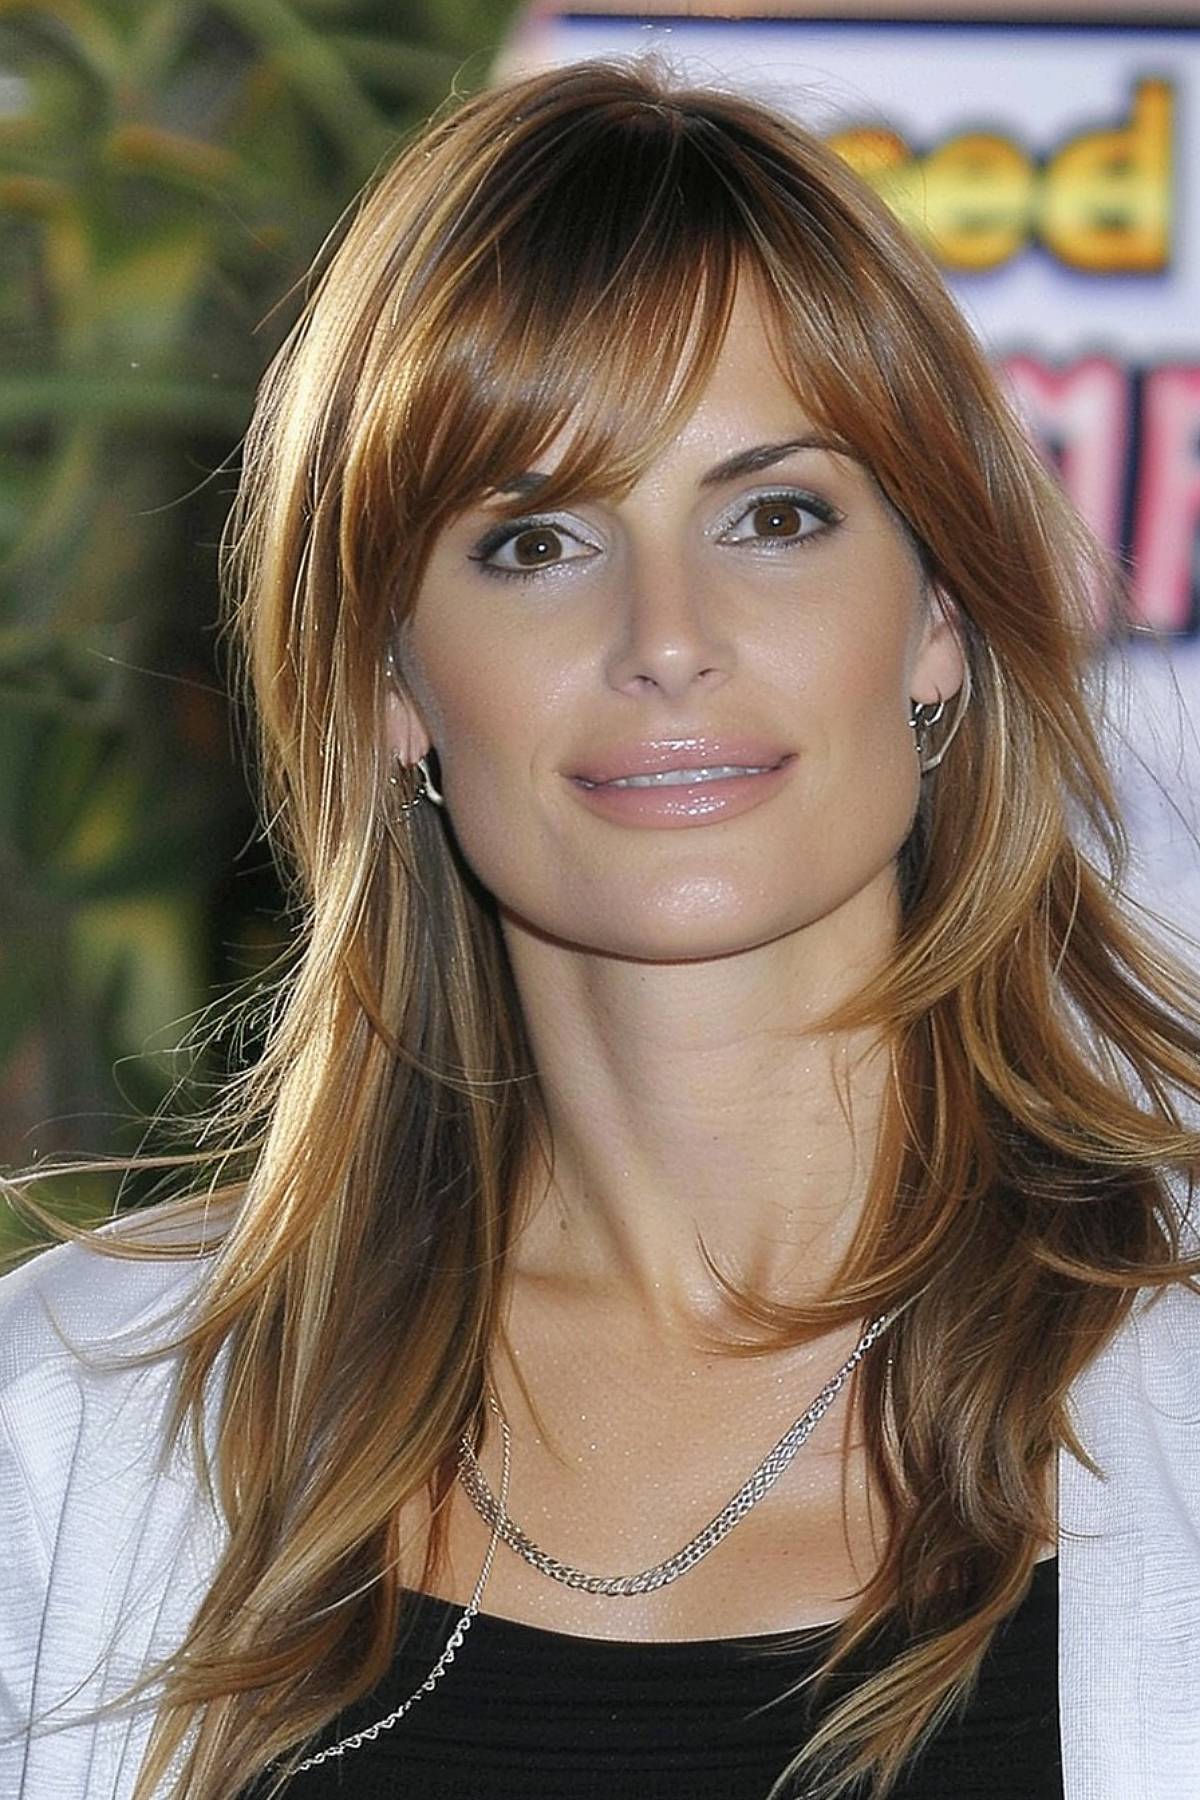 Side-swept bangs are styled to accentuate your long face shape, giving you a sophisticated and chic look.